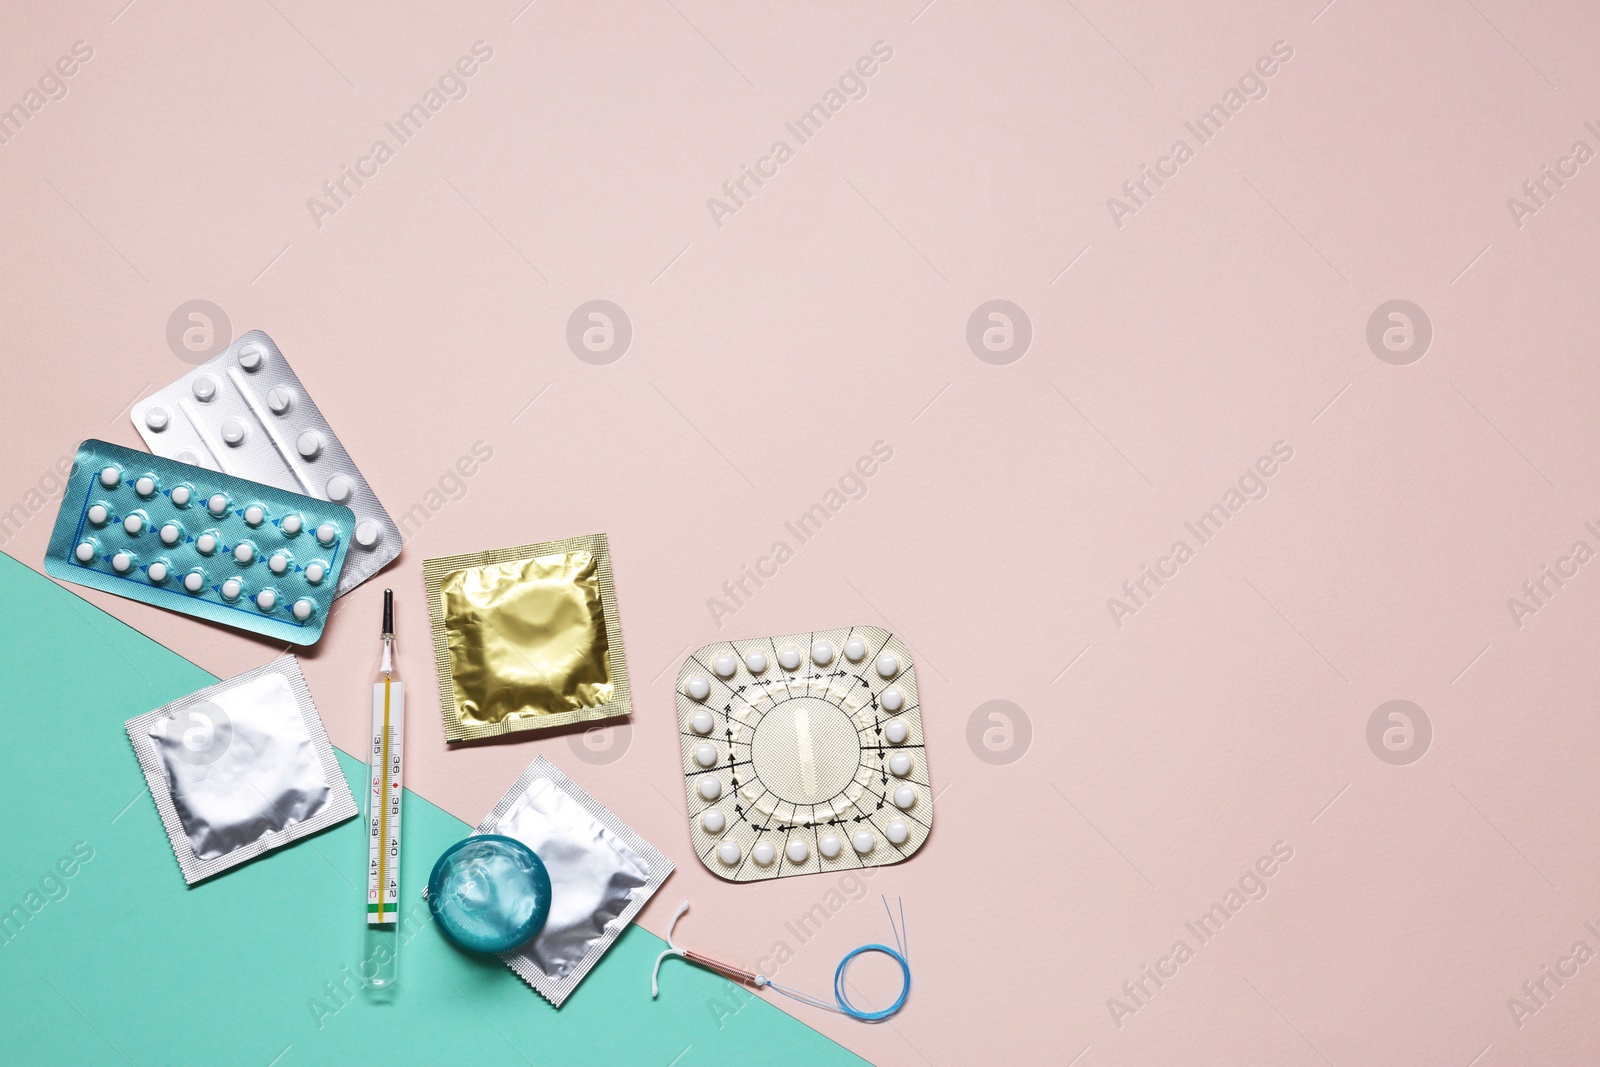 Photo of Contraceptive pills, condoms, intrauterine device and thermometer on color background, flat lay with space for text. Different birth control methods